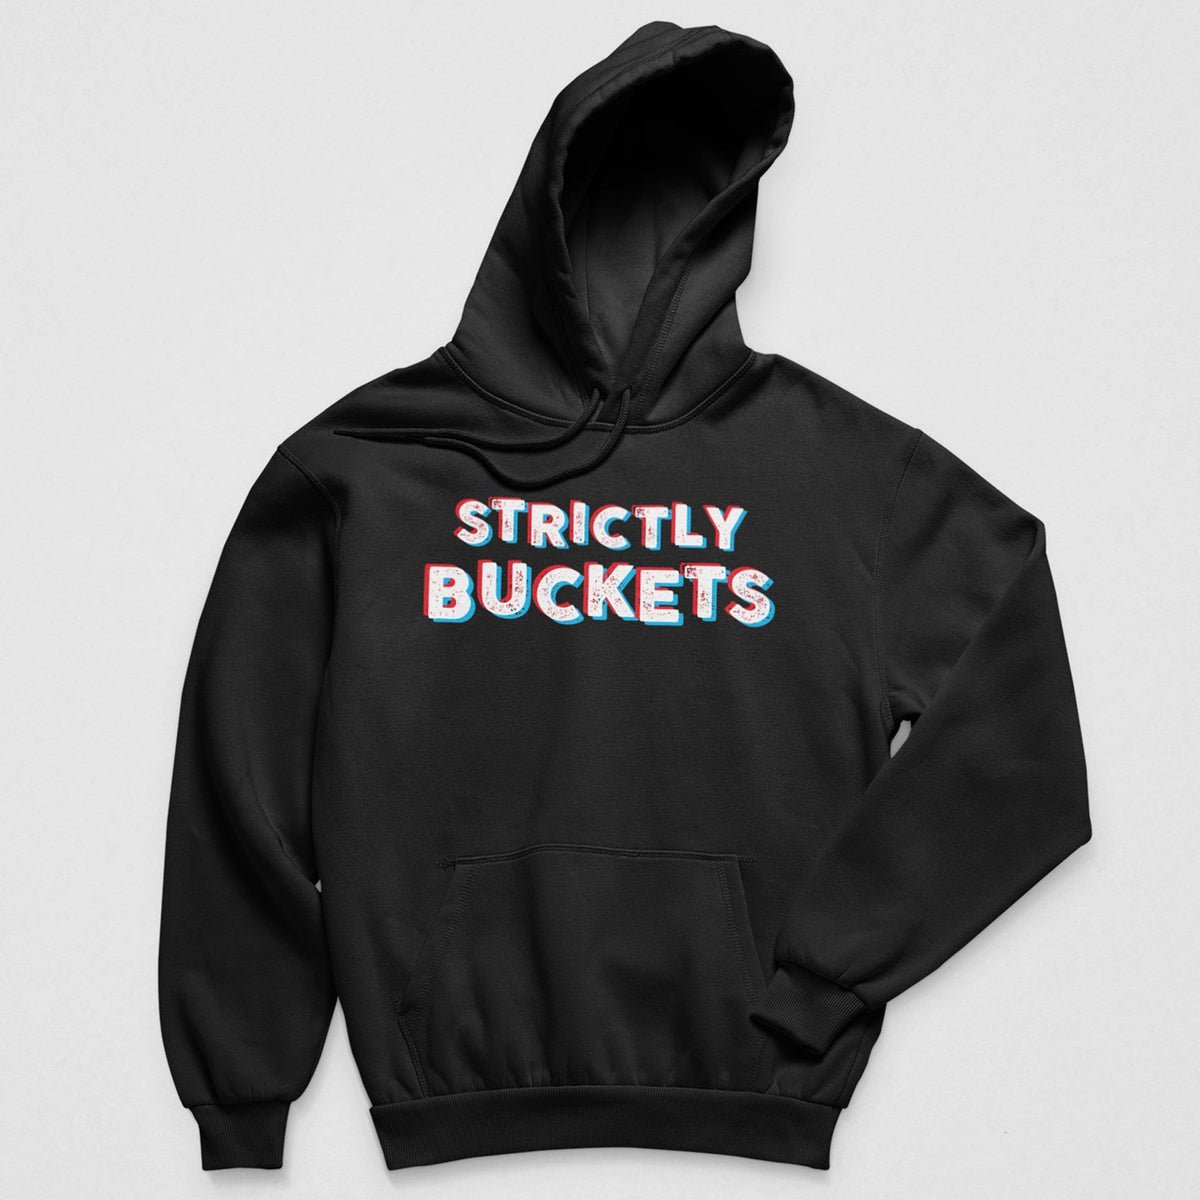 Strictly Buckets Hoodie